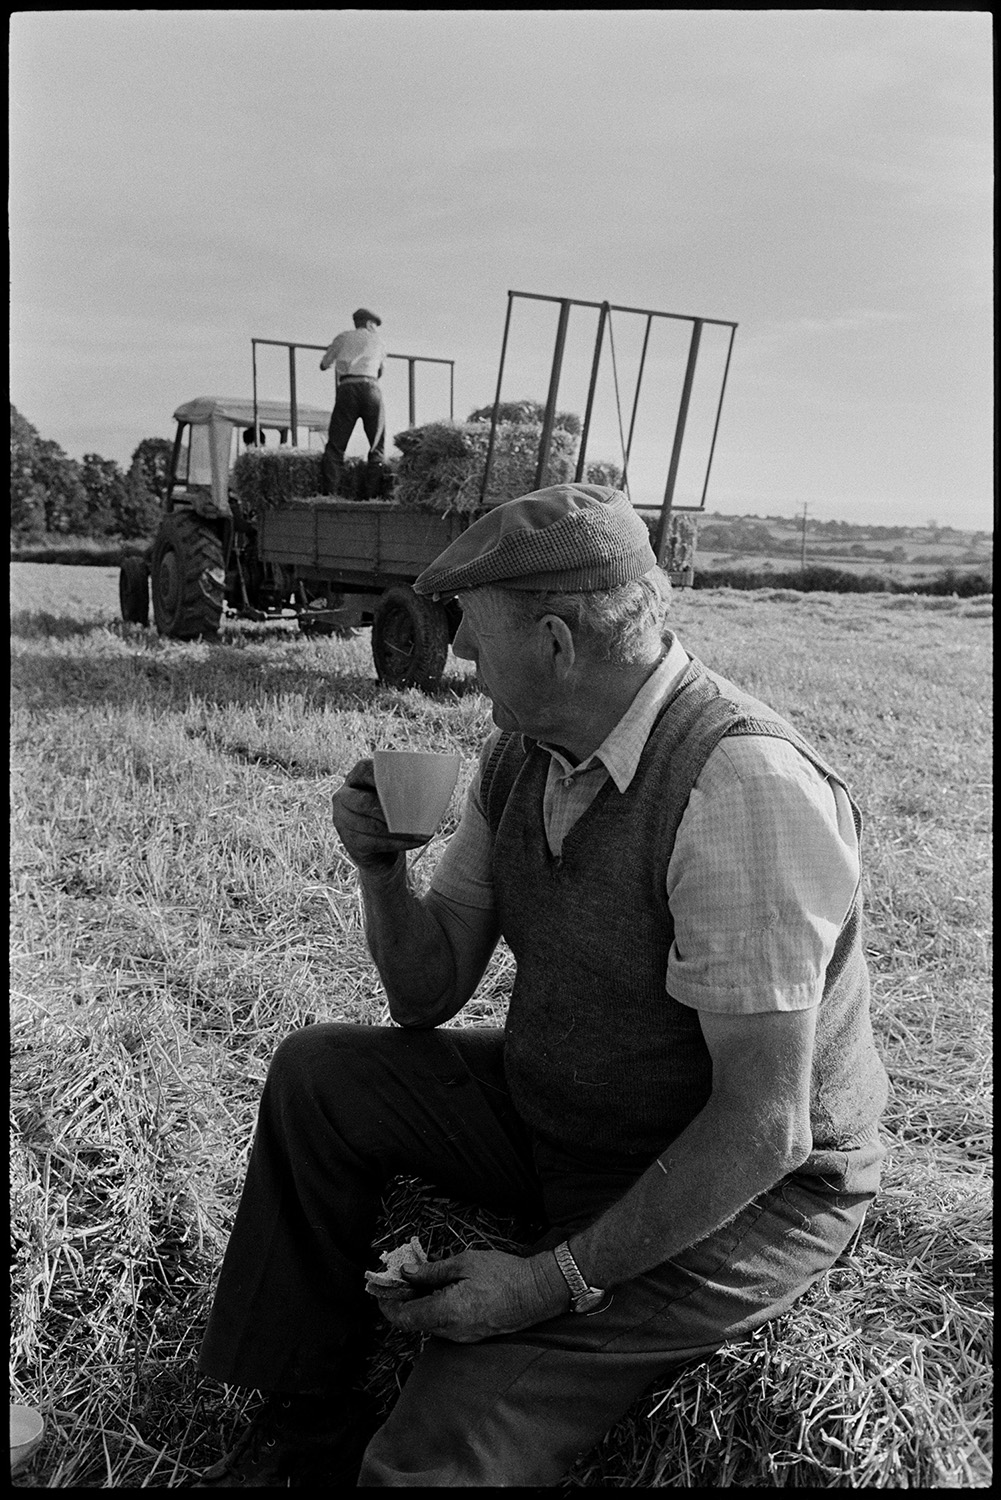 Harvesters tea in field. 
[John Ward sat on a bale of straw and drinking a cup of tea in a field at Nethercott, Iddesleigh, while he has a break from harvesting. A man is stood with straw bales on a trailer in the background.]